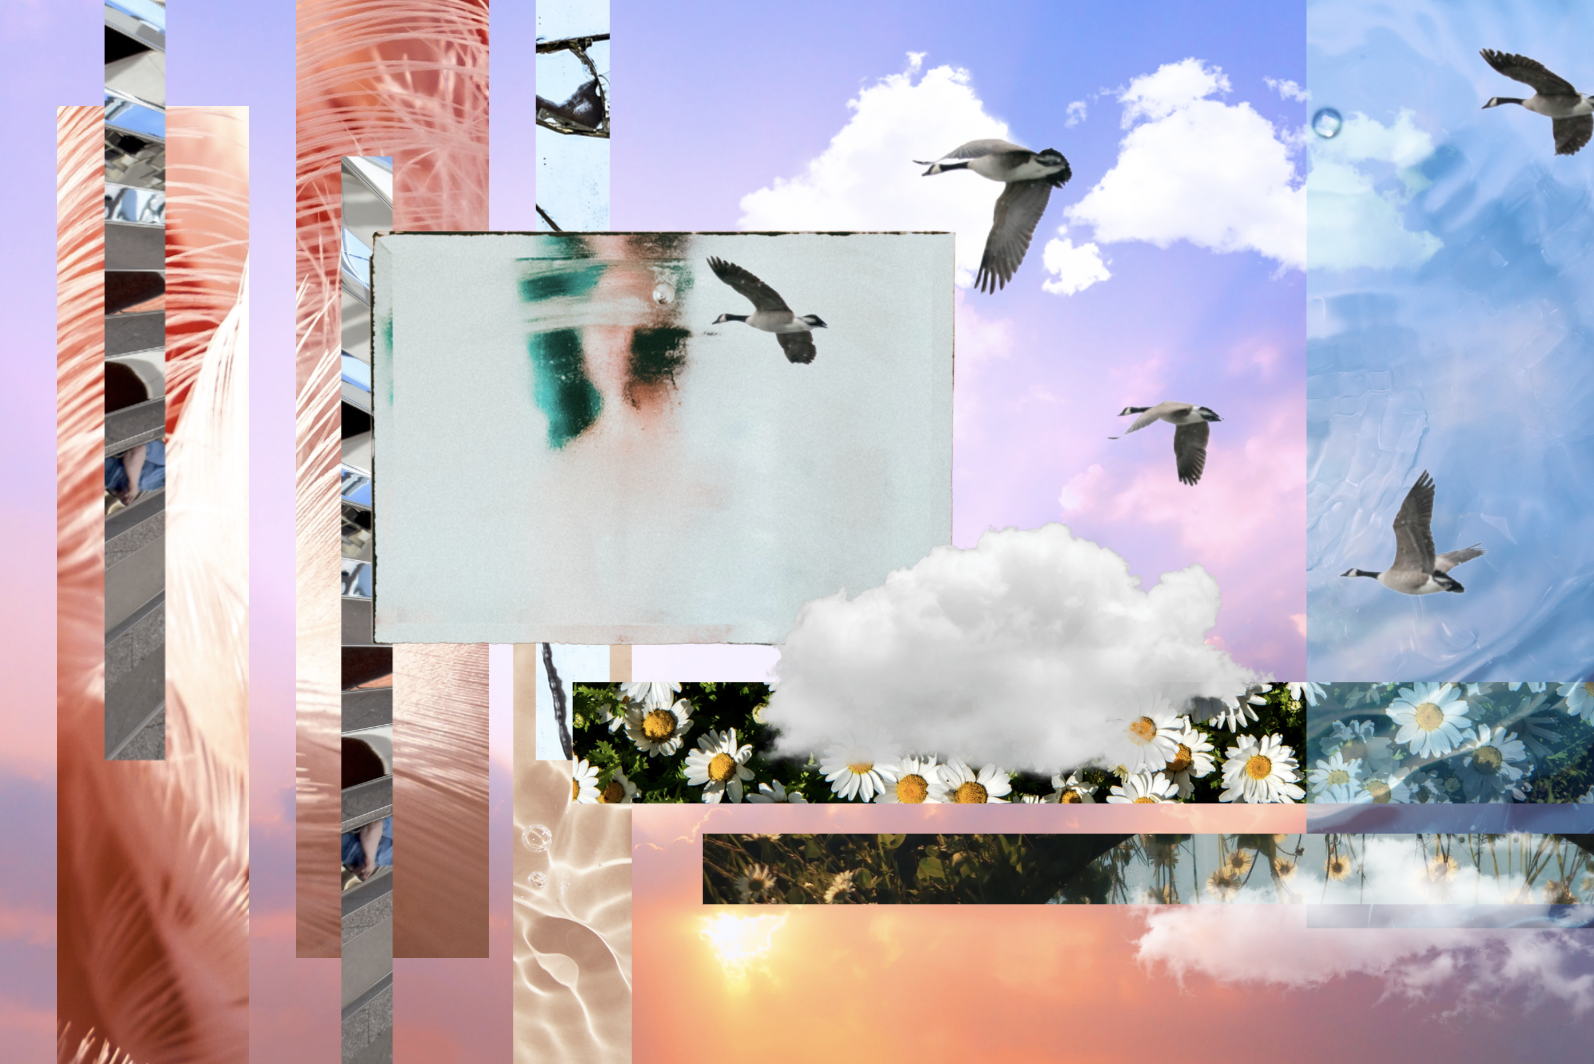 digital collage with a warm, whimsical feeling. Birds fly among clouds as the sun sets